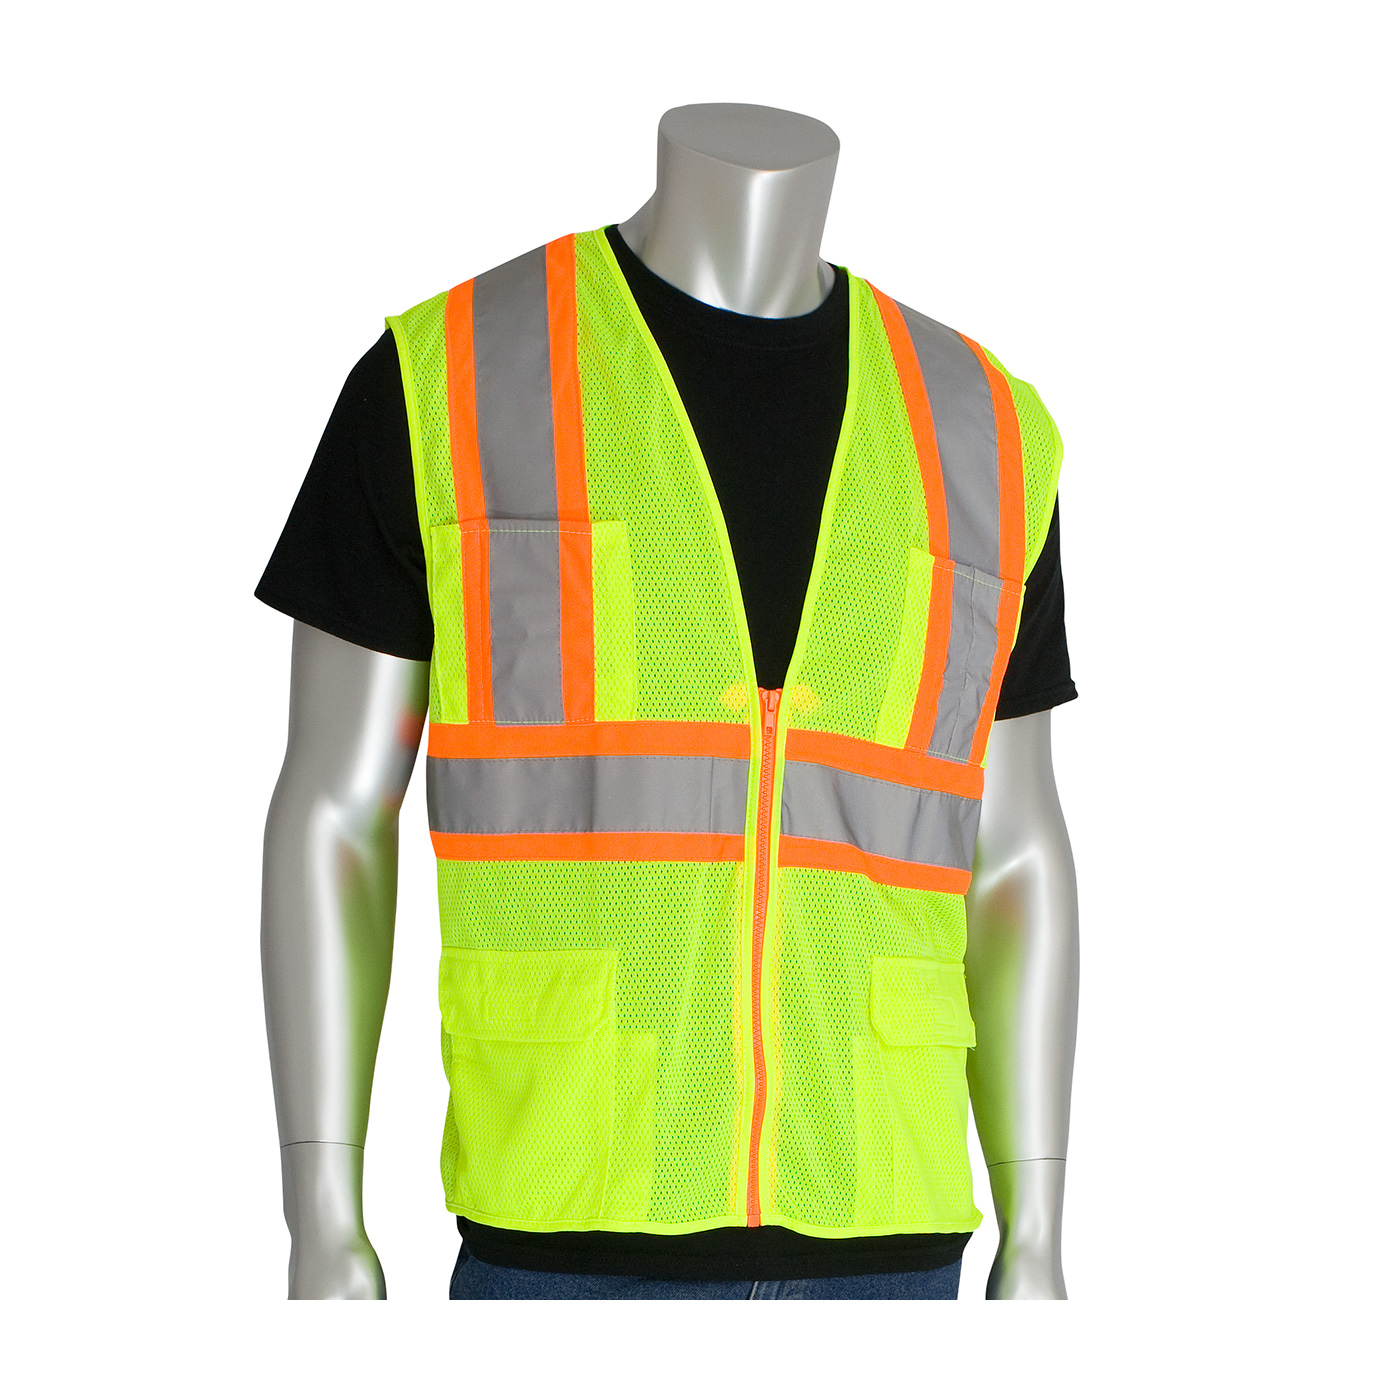 PIP 302-MAPMLY-2X ANSI Type R Class 2 Yellow Two-Tone Eleven Pocket Premium Mesh Surveyors Vest - 2X-Large PID-302 MAPMLY 2X